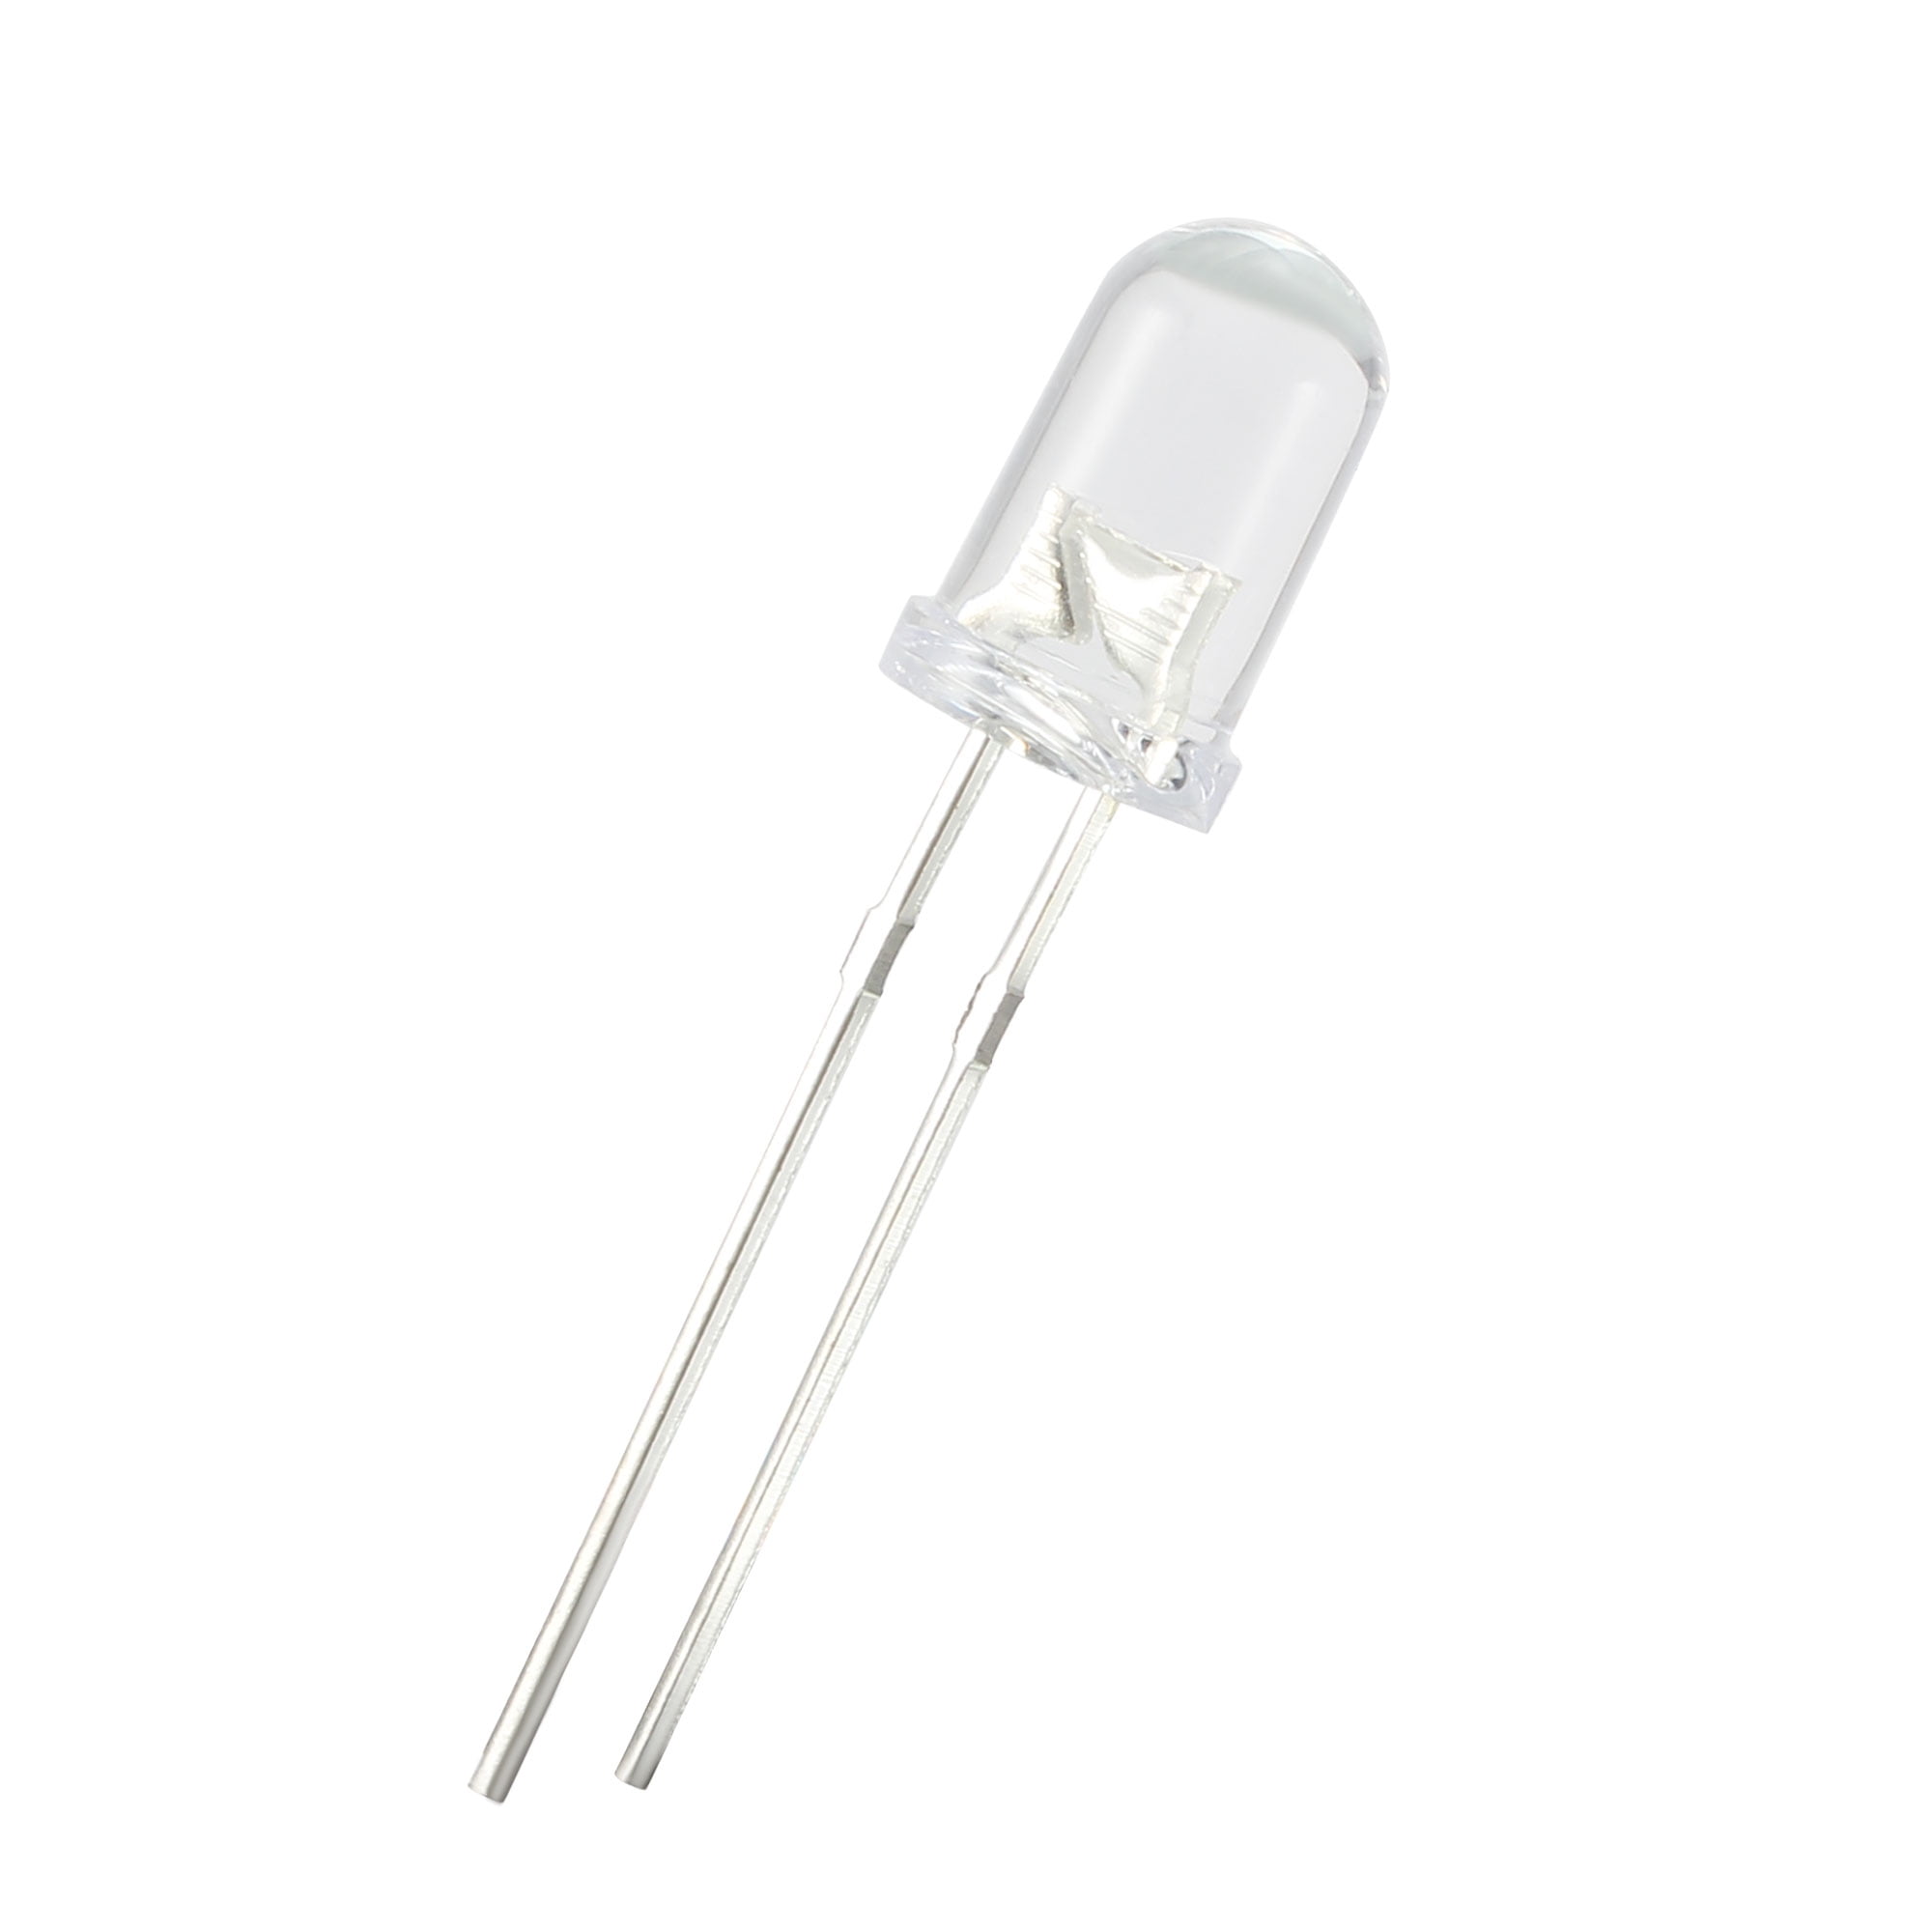 UV/Purple 5mm LED Diodes Pack of 20 